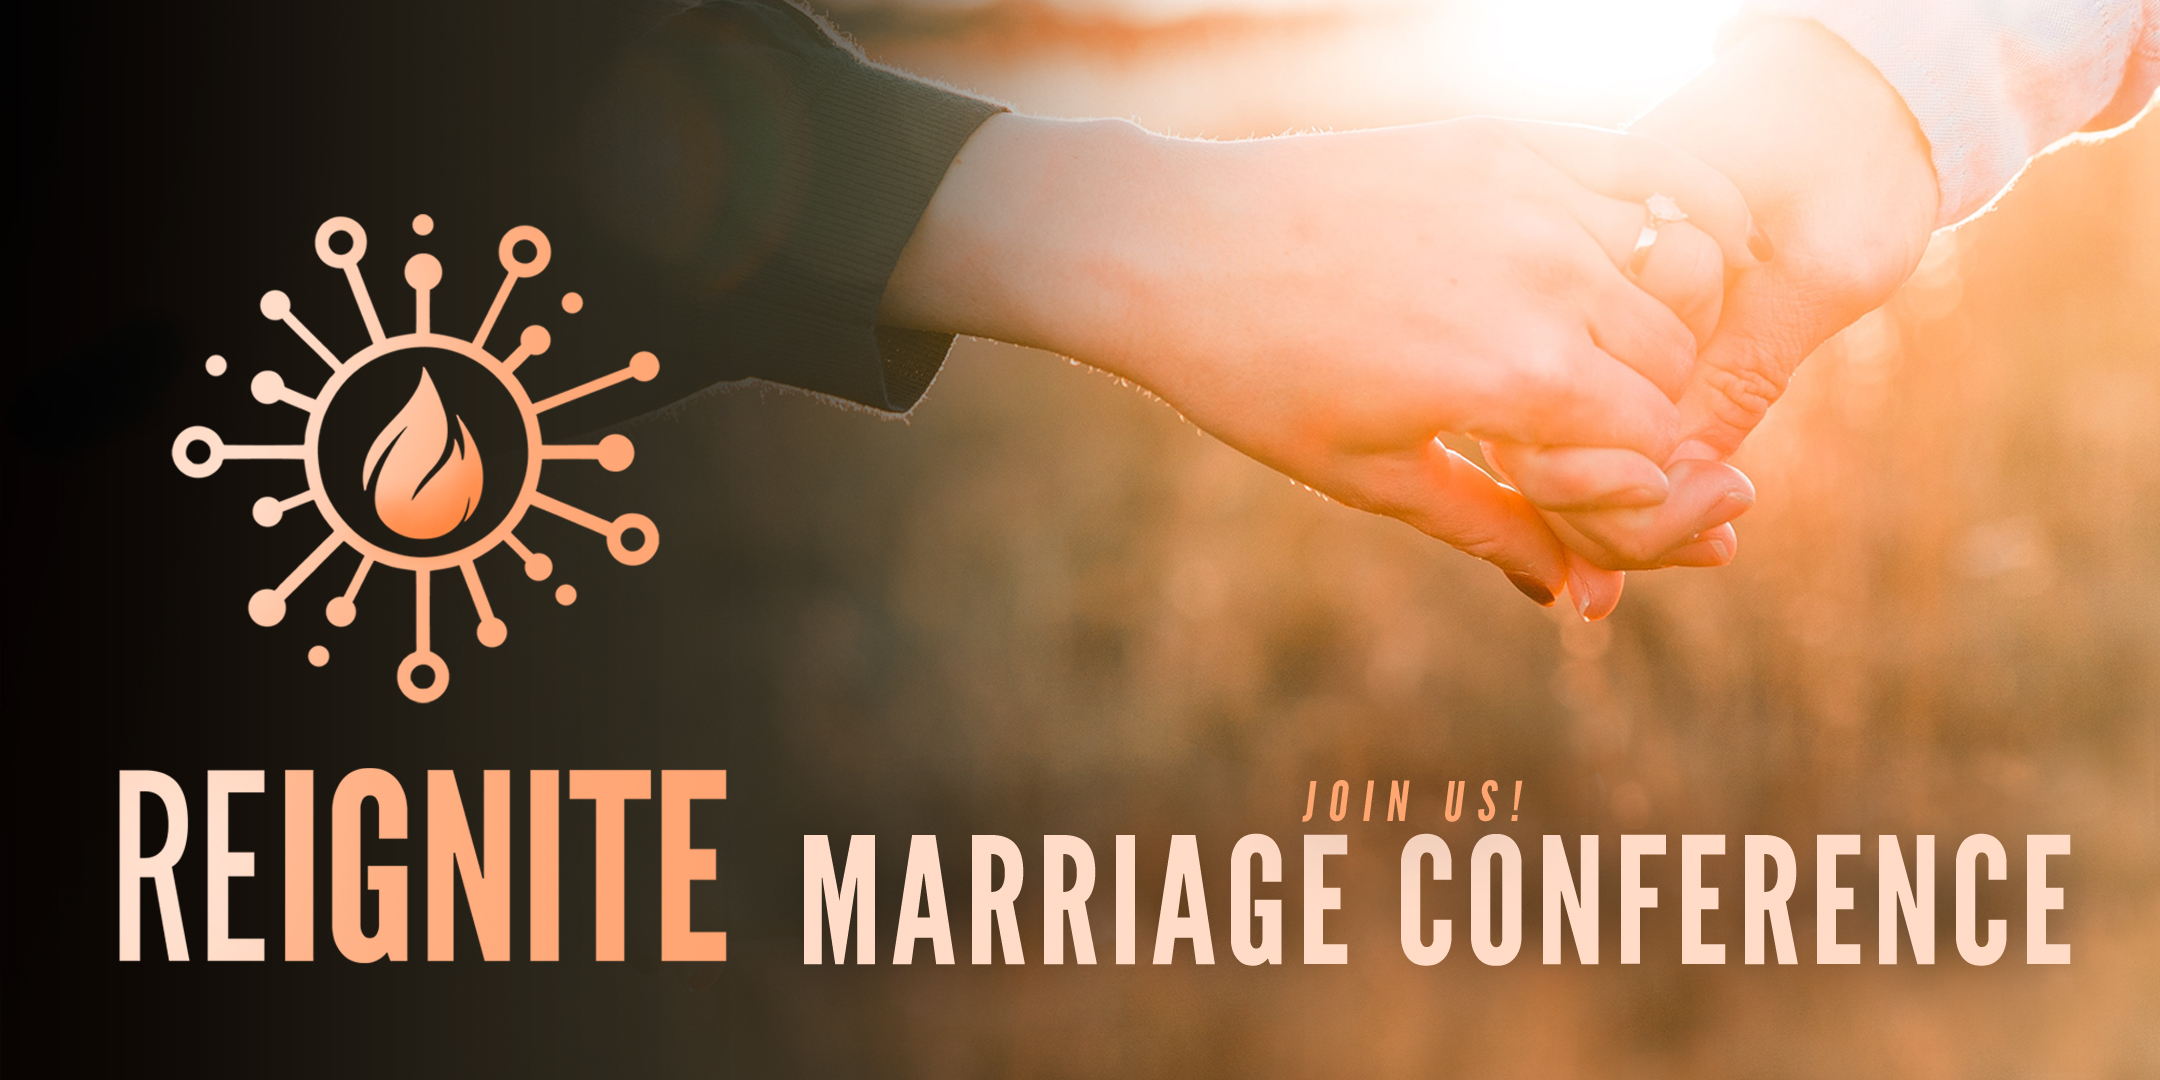 Generic ReIgnite Marriage Conference web bar ad